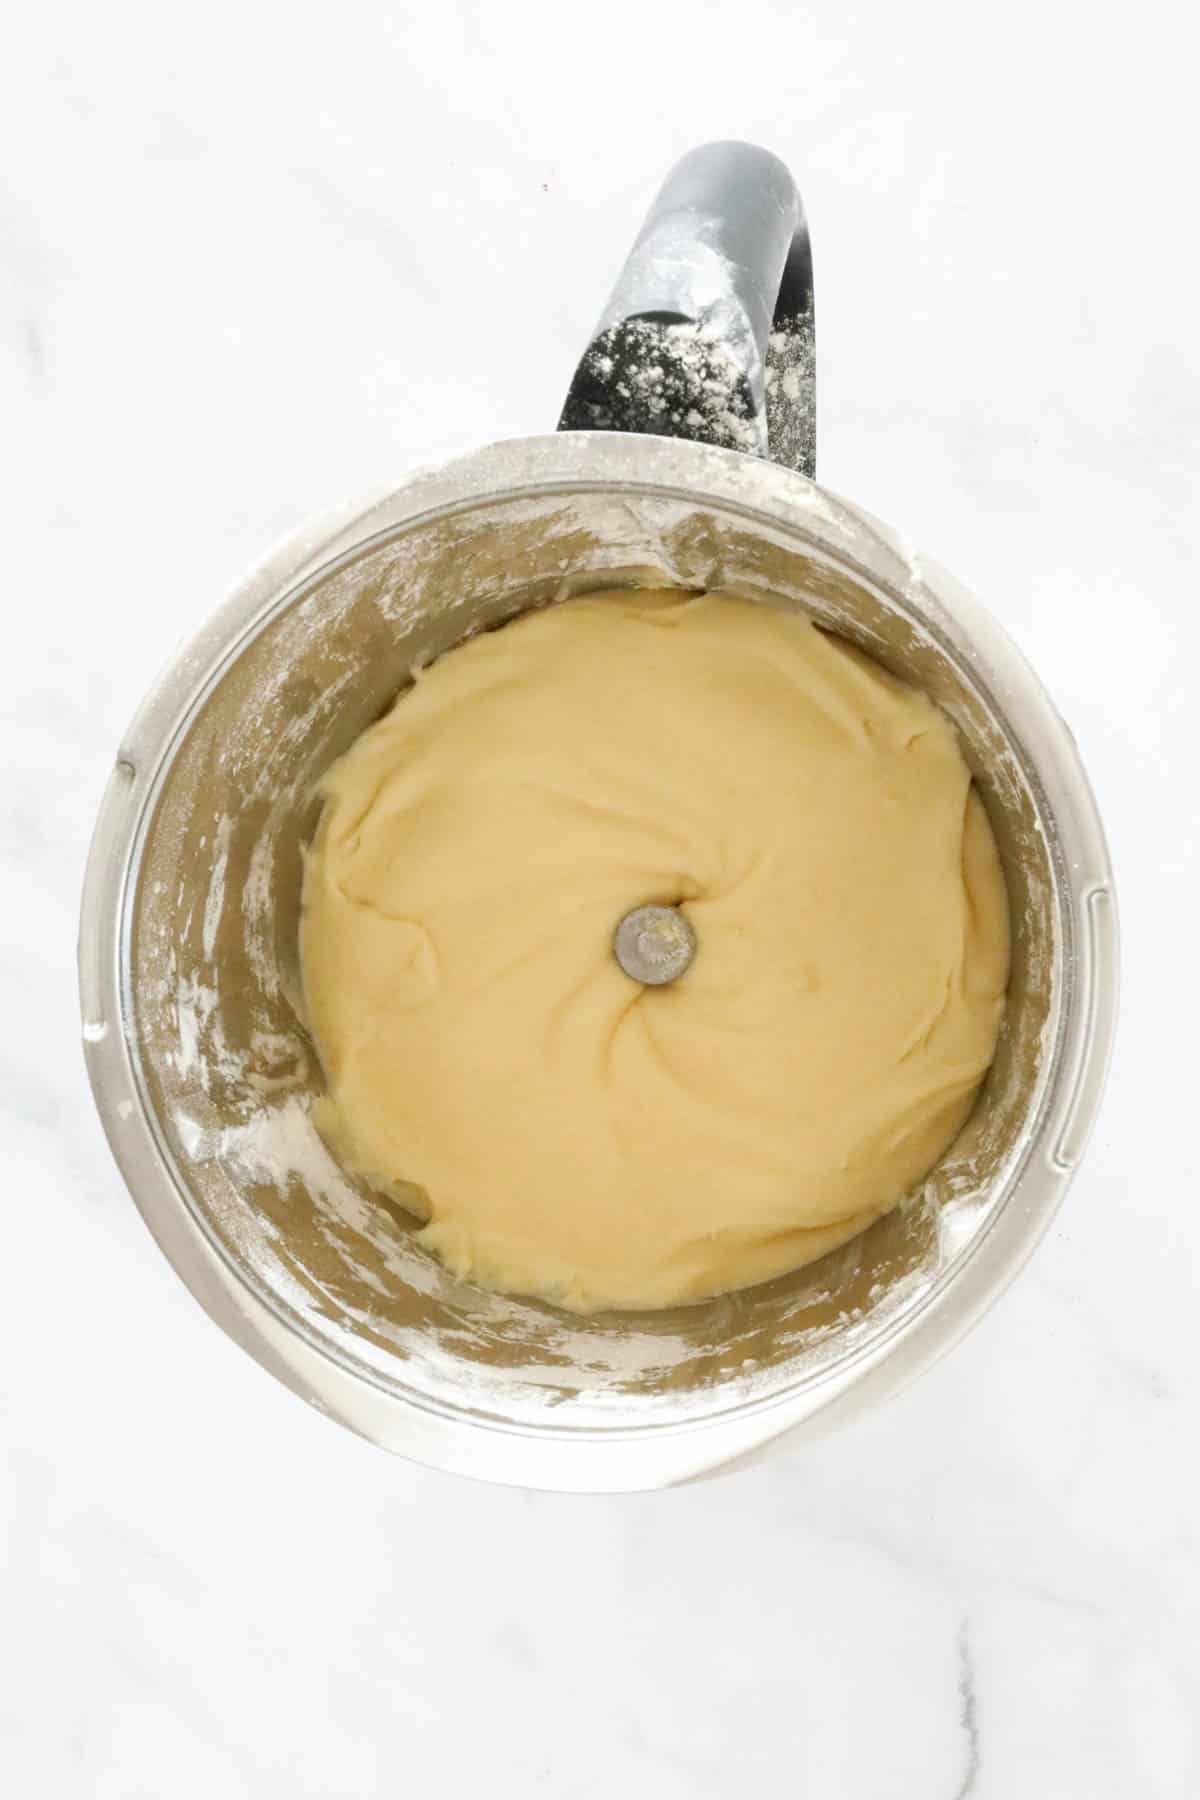 Cupcake mixture in a Thermomix.